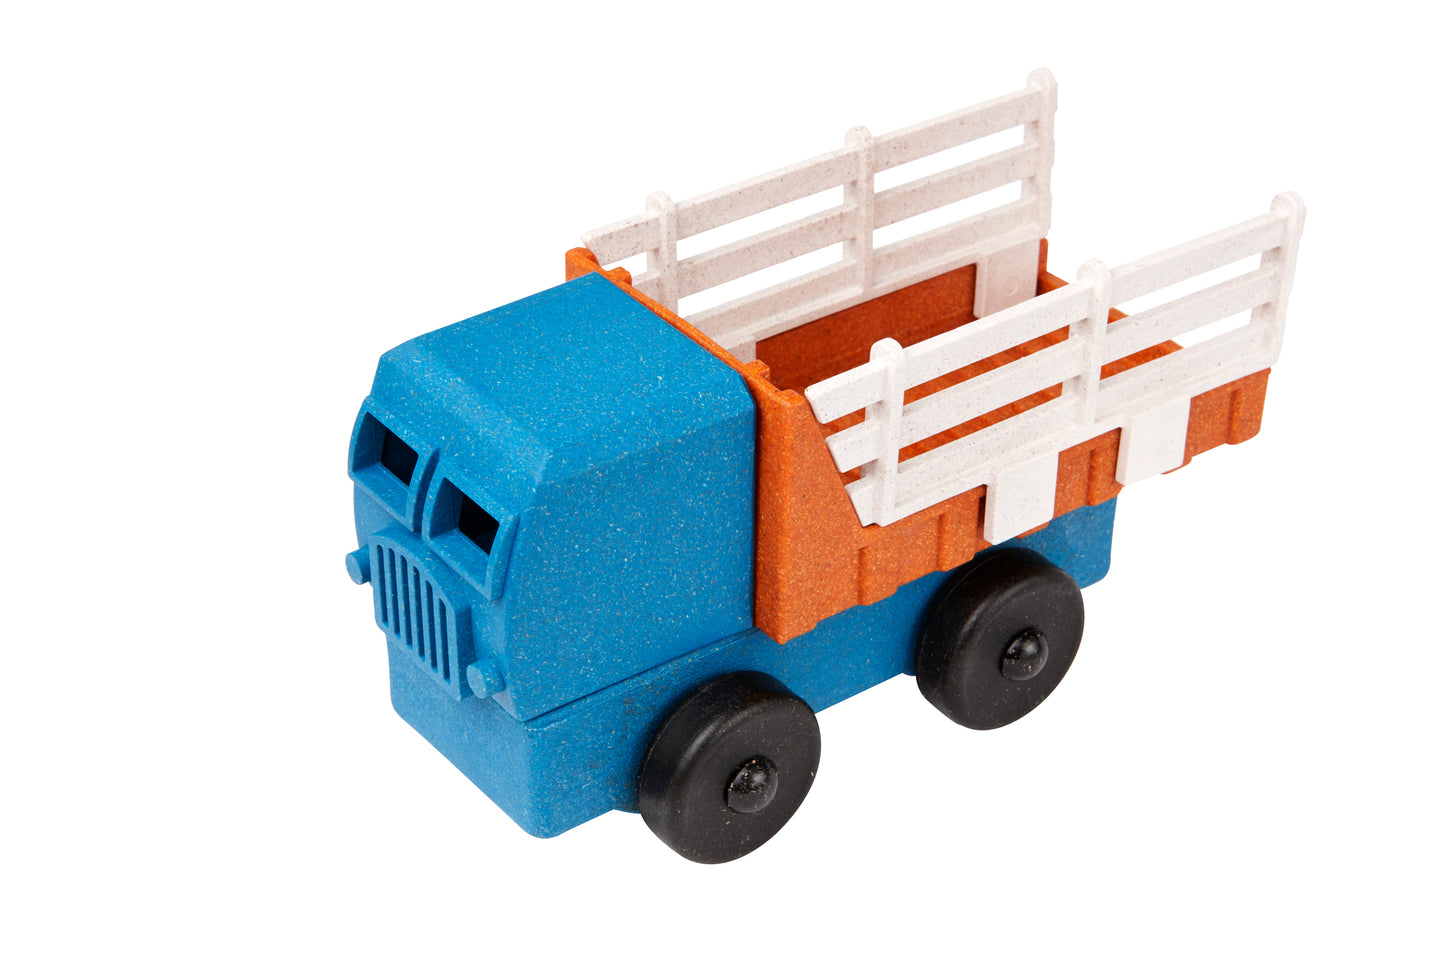 Luke's Toy Factory Stake Truck Toy